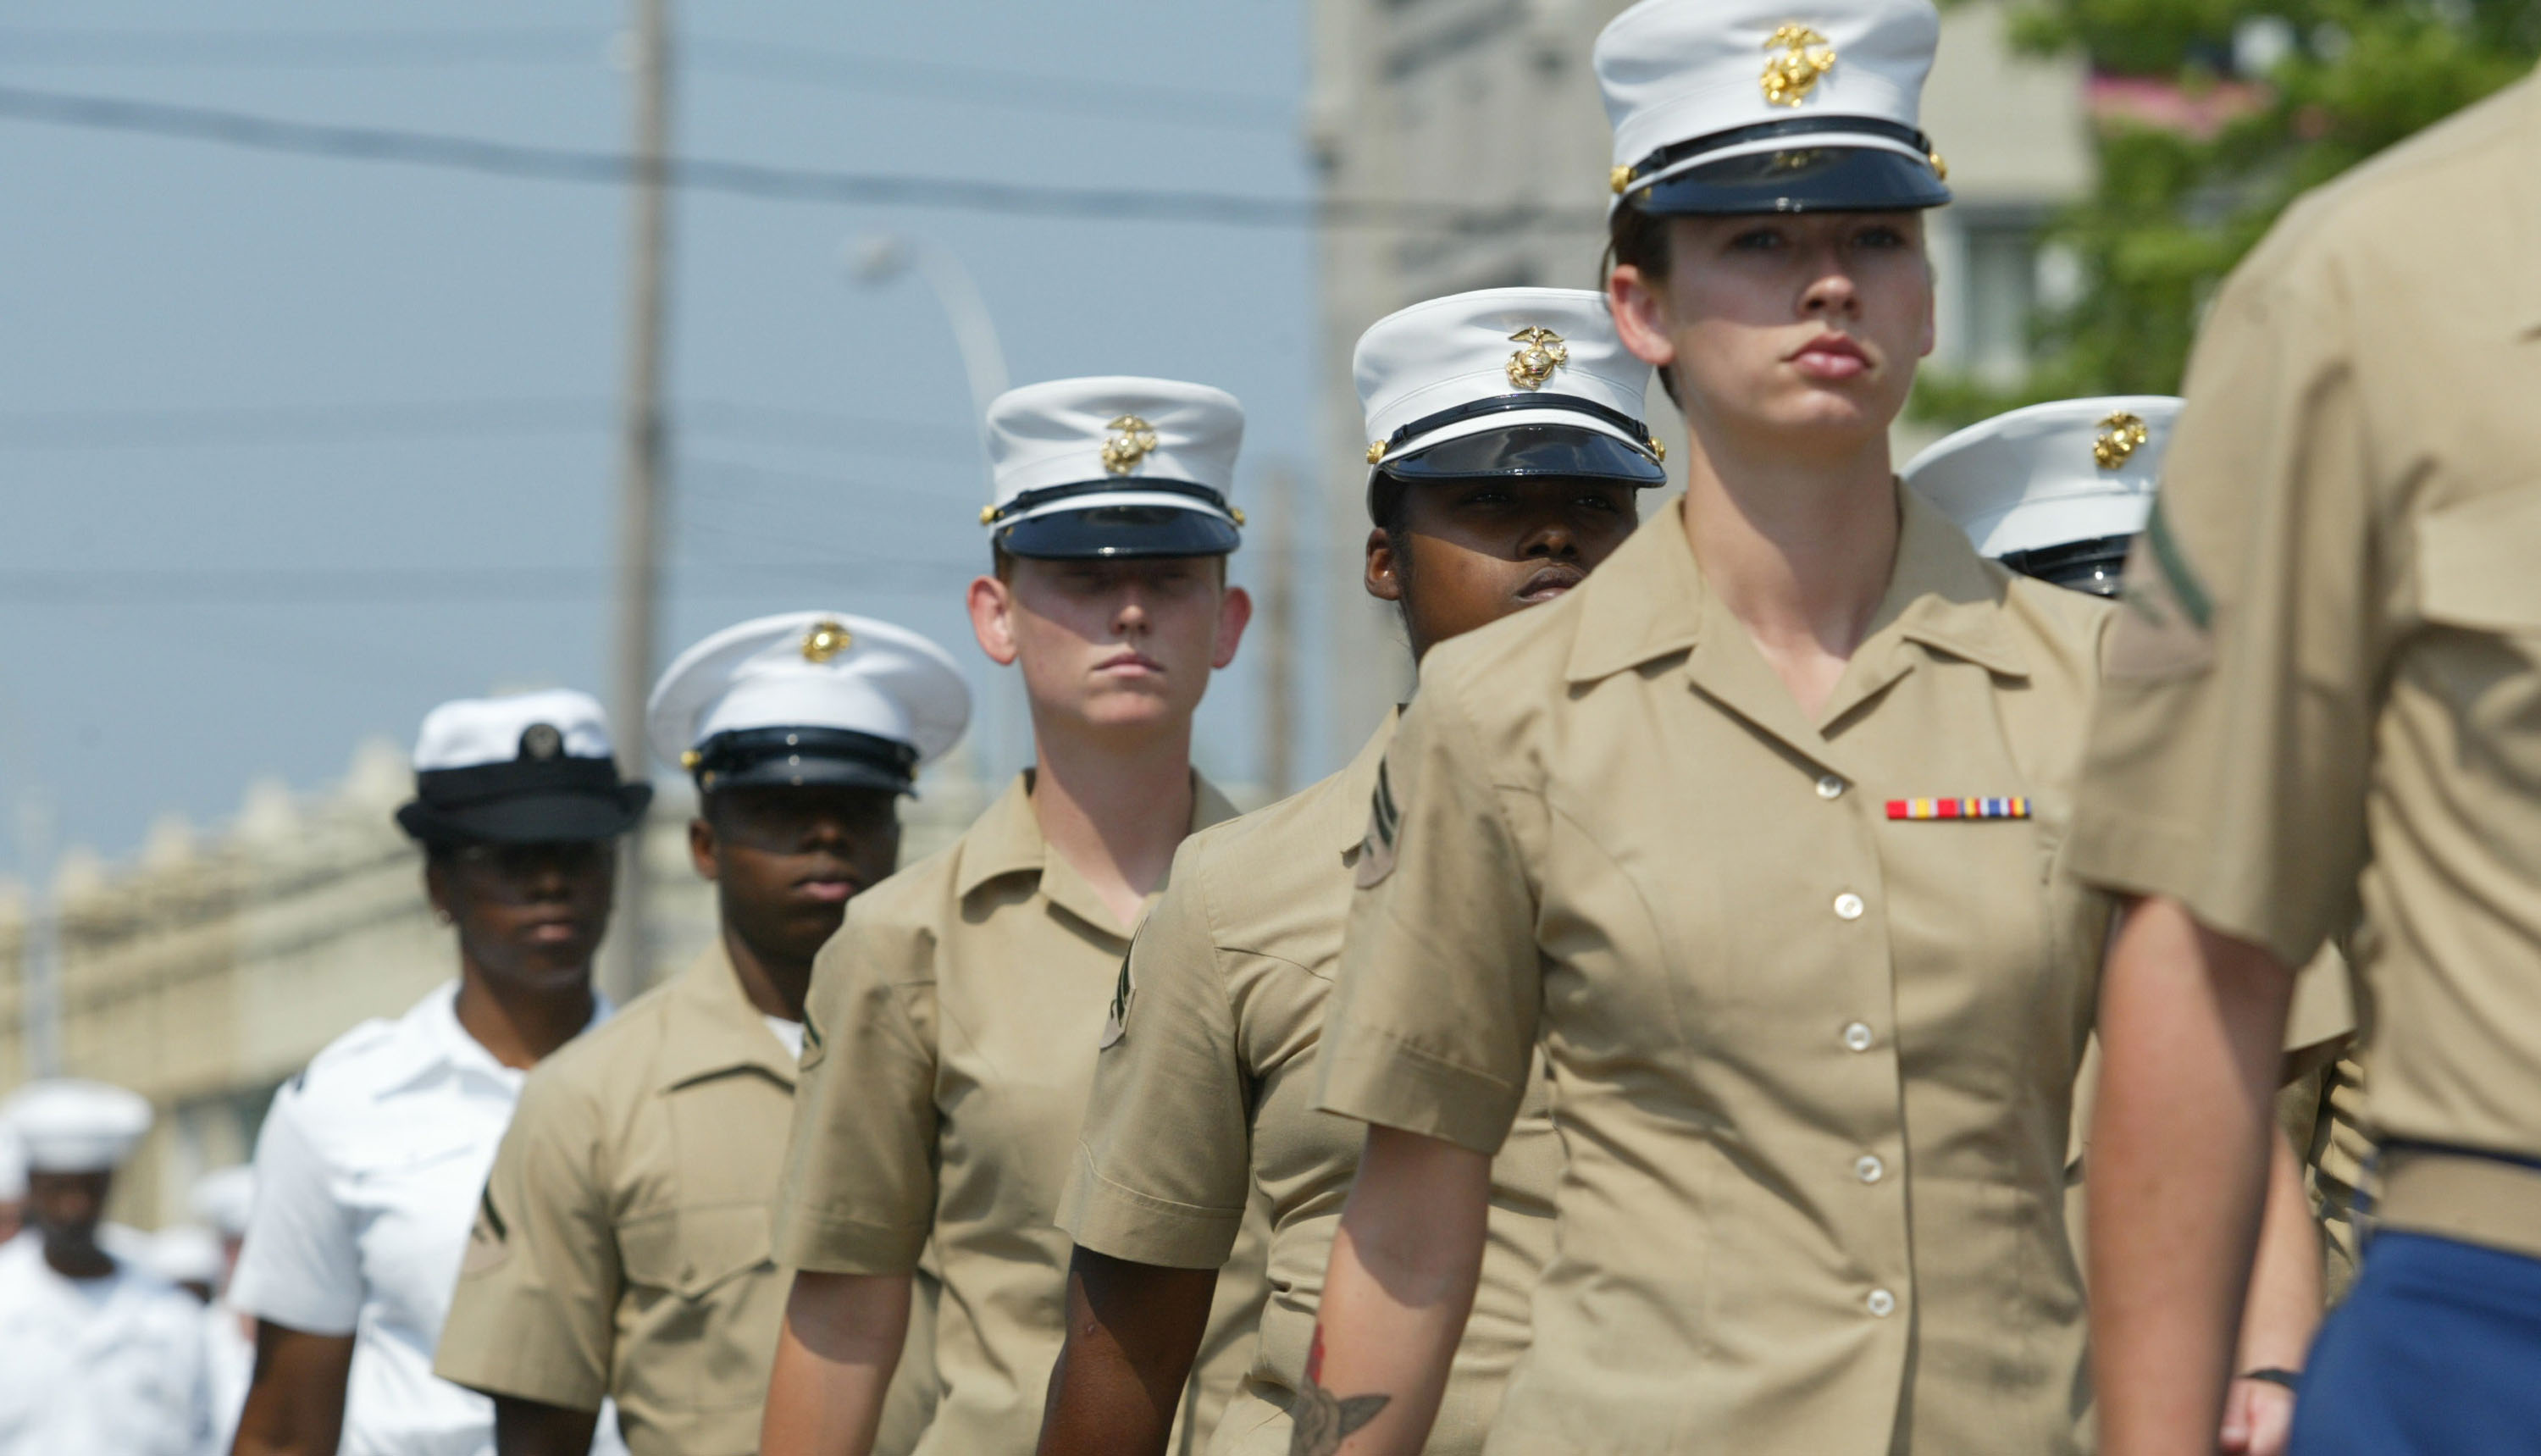 U.S. Military to Open All Combat Roles to Women